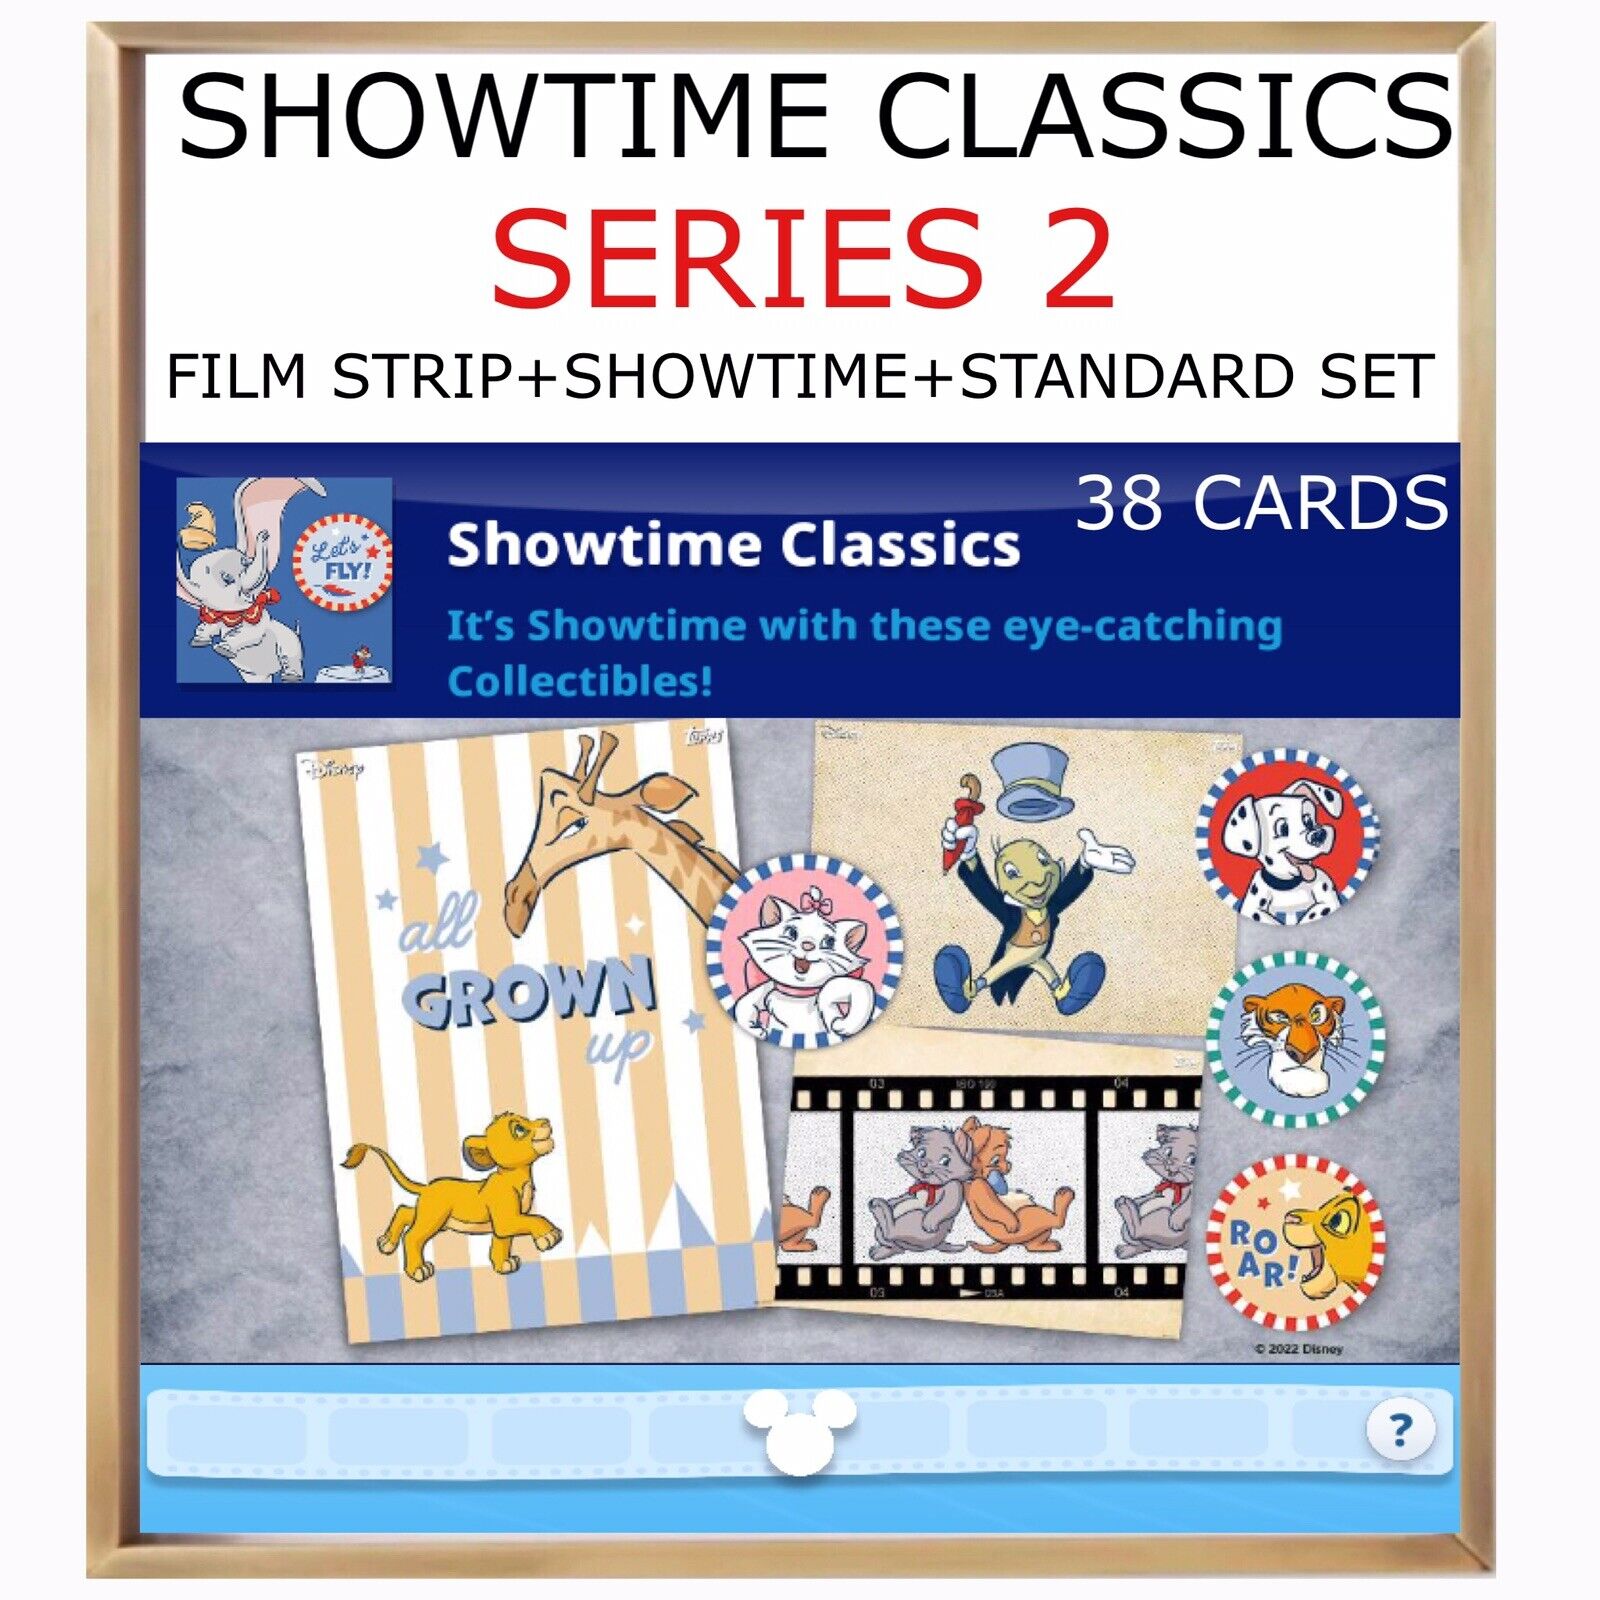 SHOWTIME CLASSICS SERIES 2-FILM STRIP++38 CARD SET-TOPPS DISNEY COLLECT